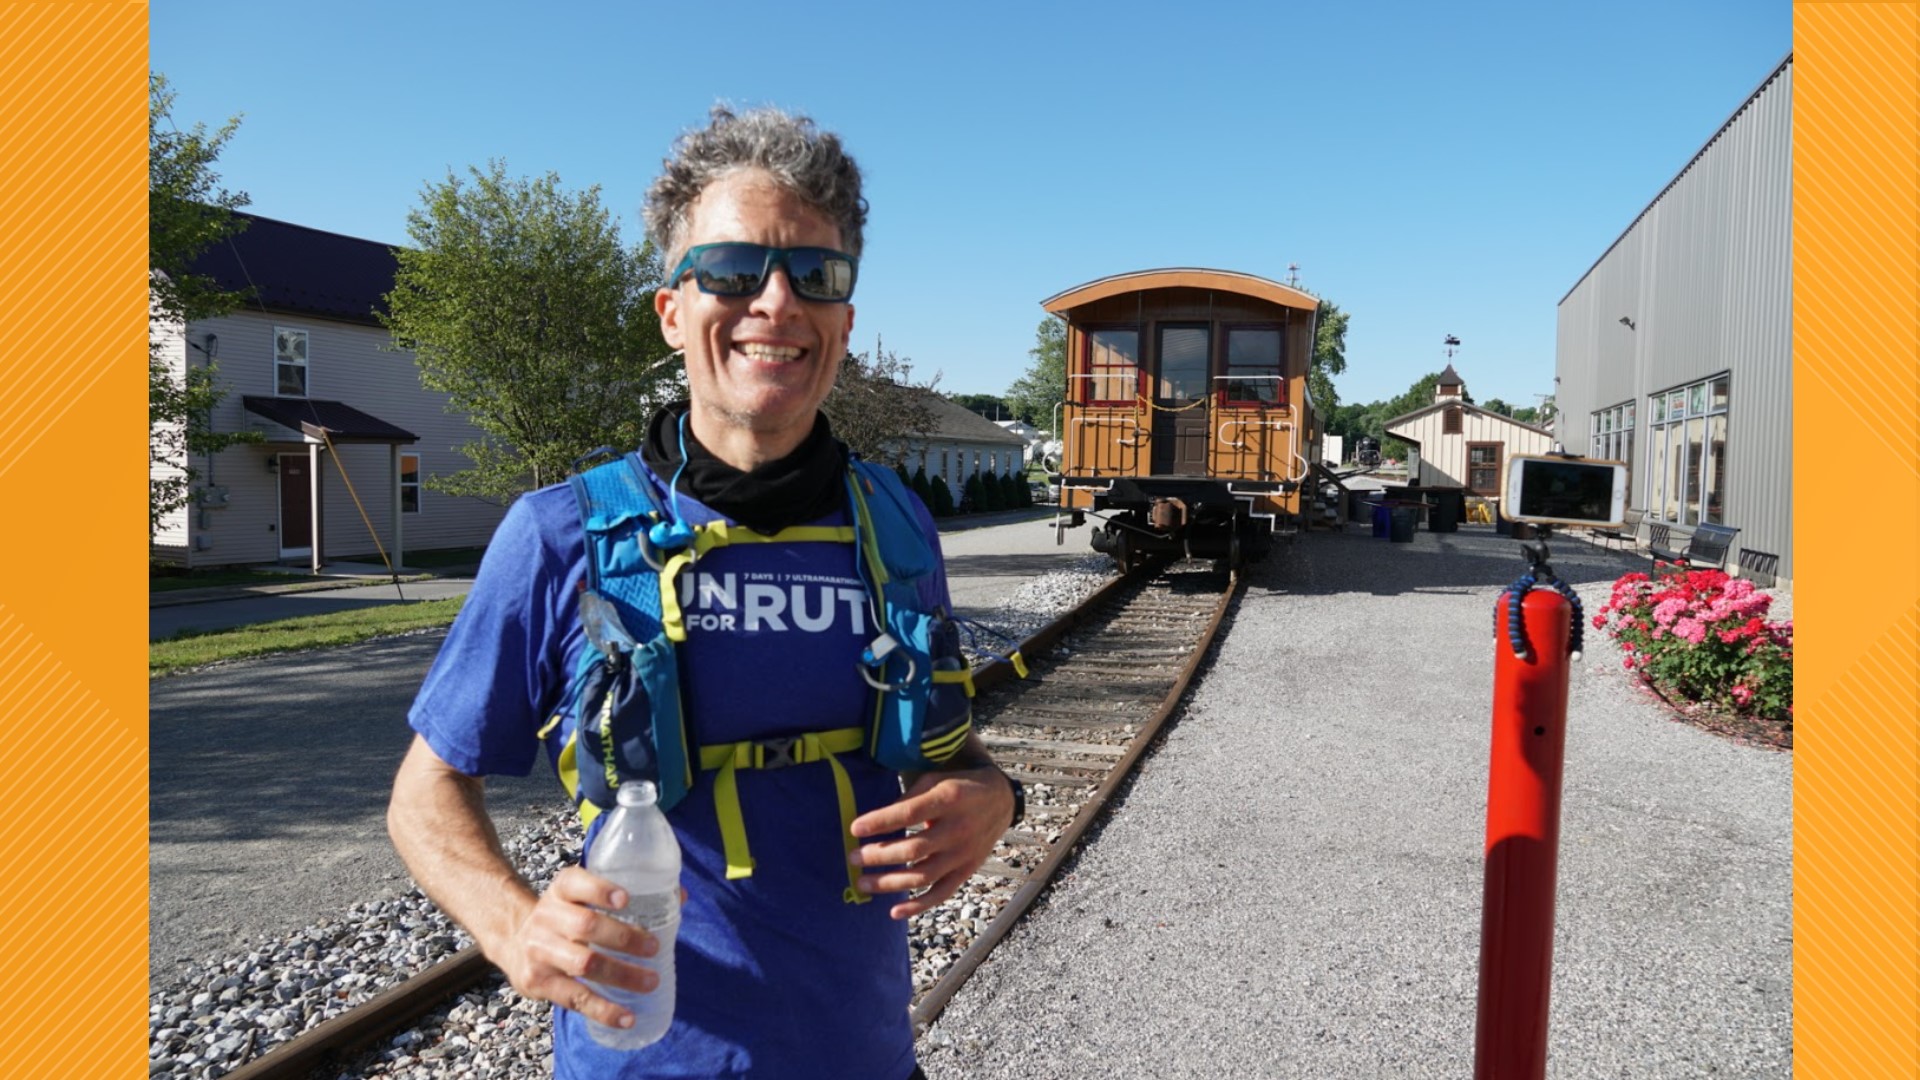 Scranton native and ultra-marathoner Corey Cappelloni is running across part of the country to visit his grandma and raise money for residents at Allied Services.